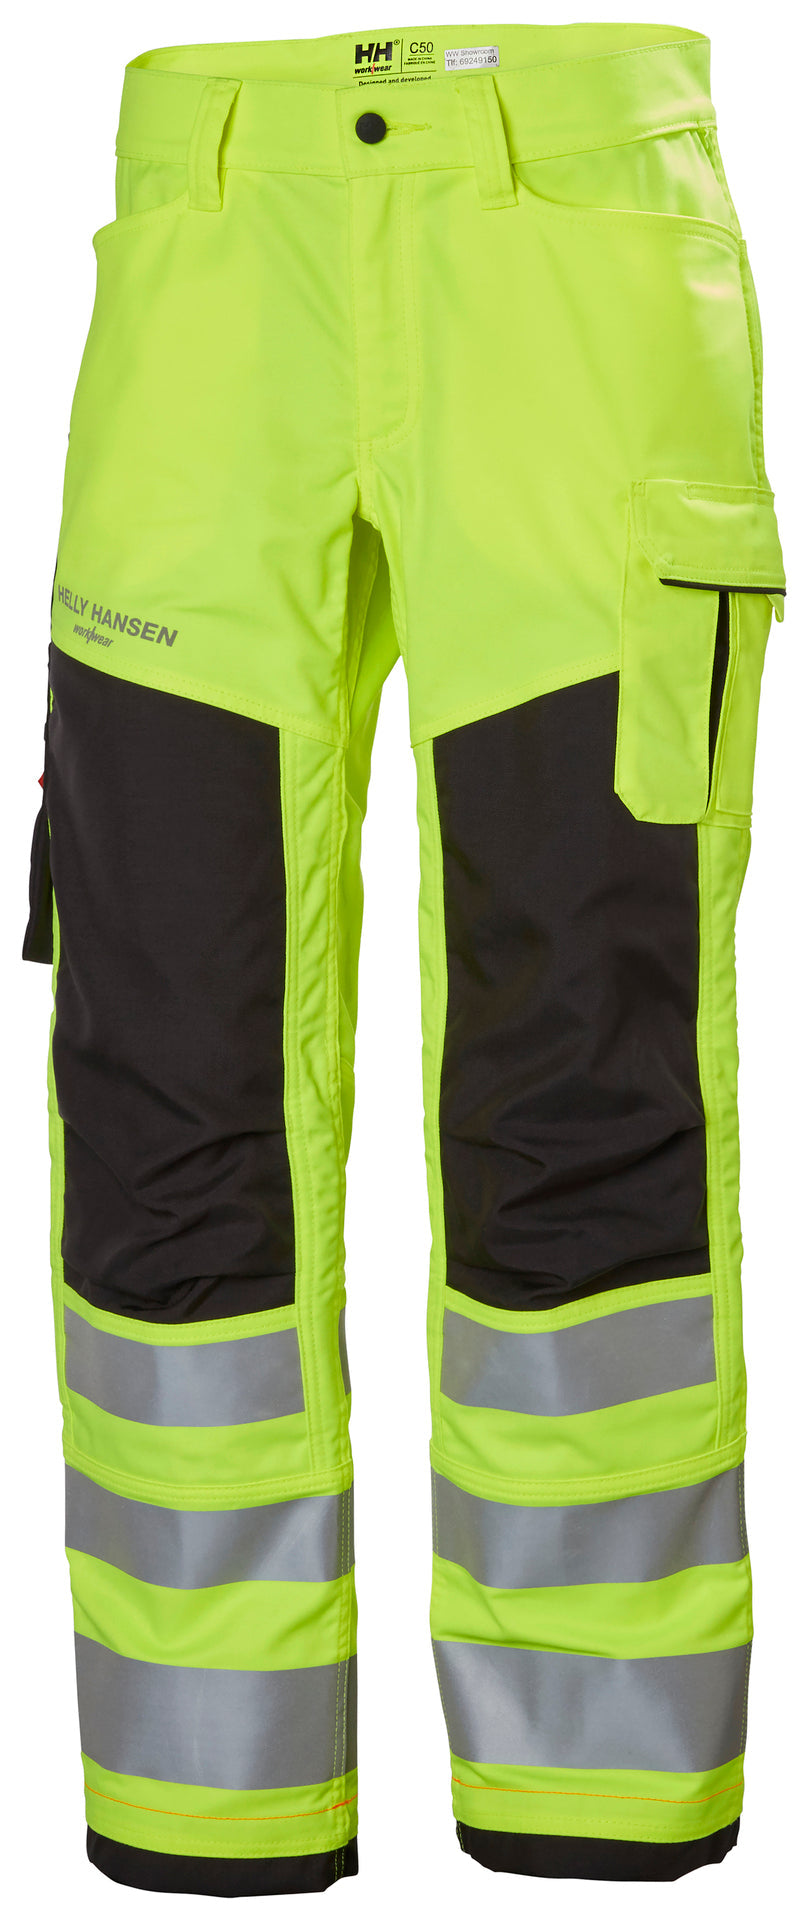 Helly Hansen Alna 2.0 Work Trousers Cl 2 - Yellow